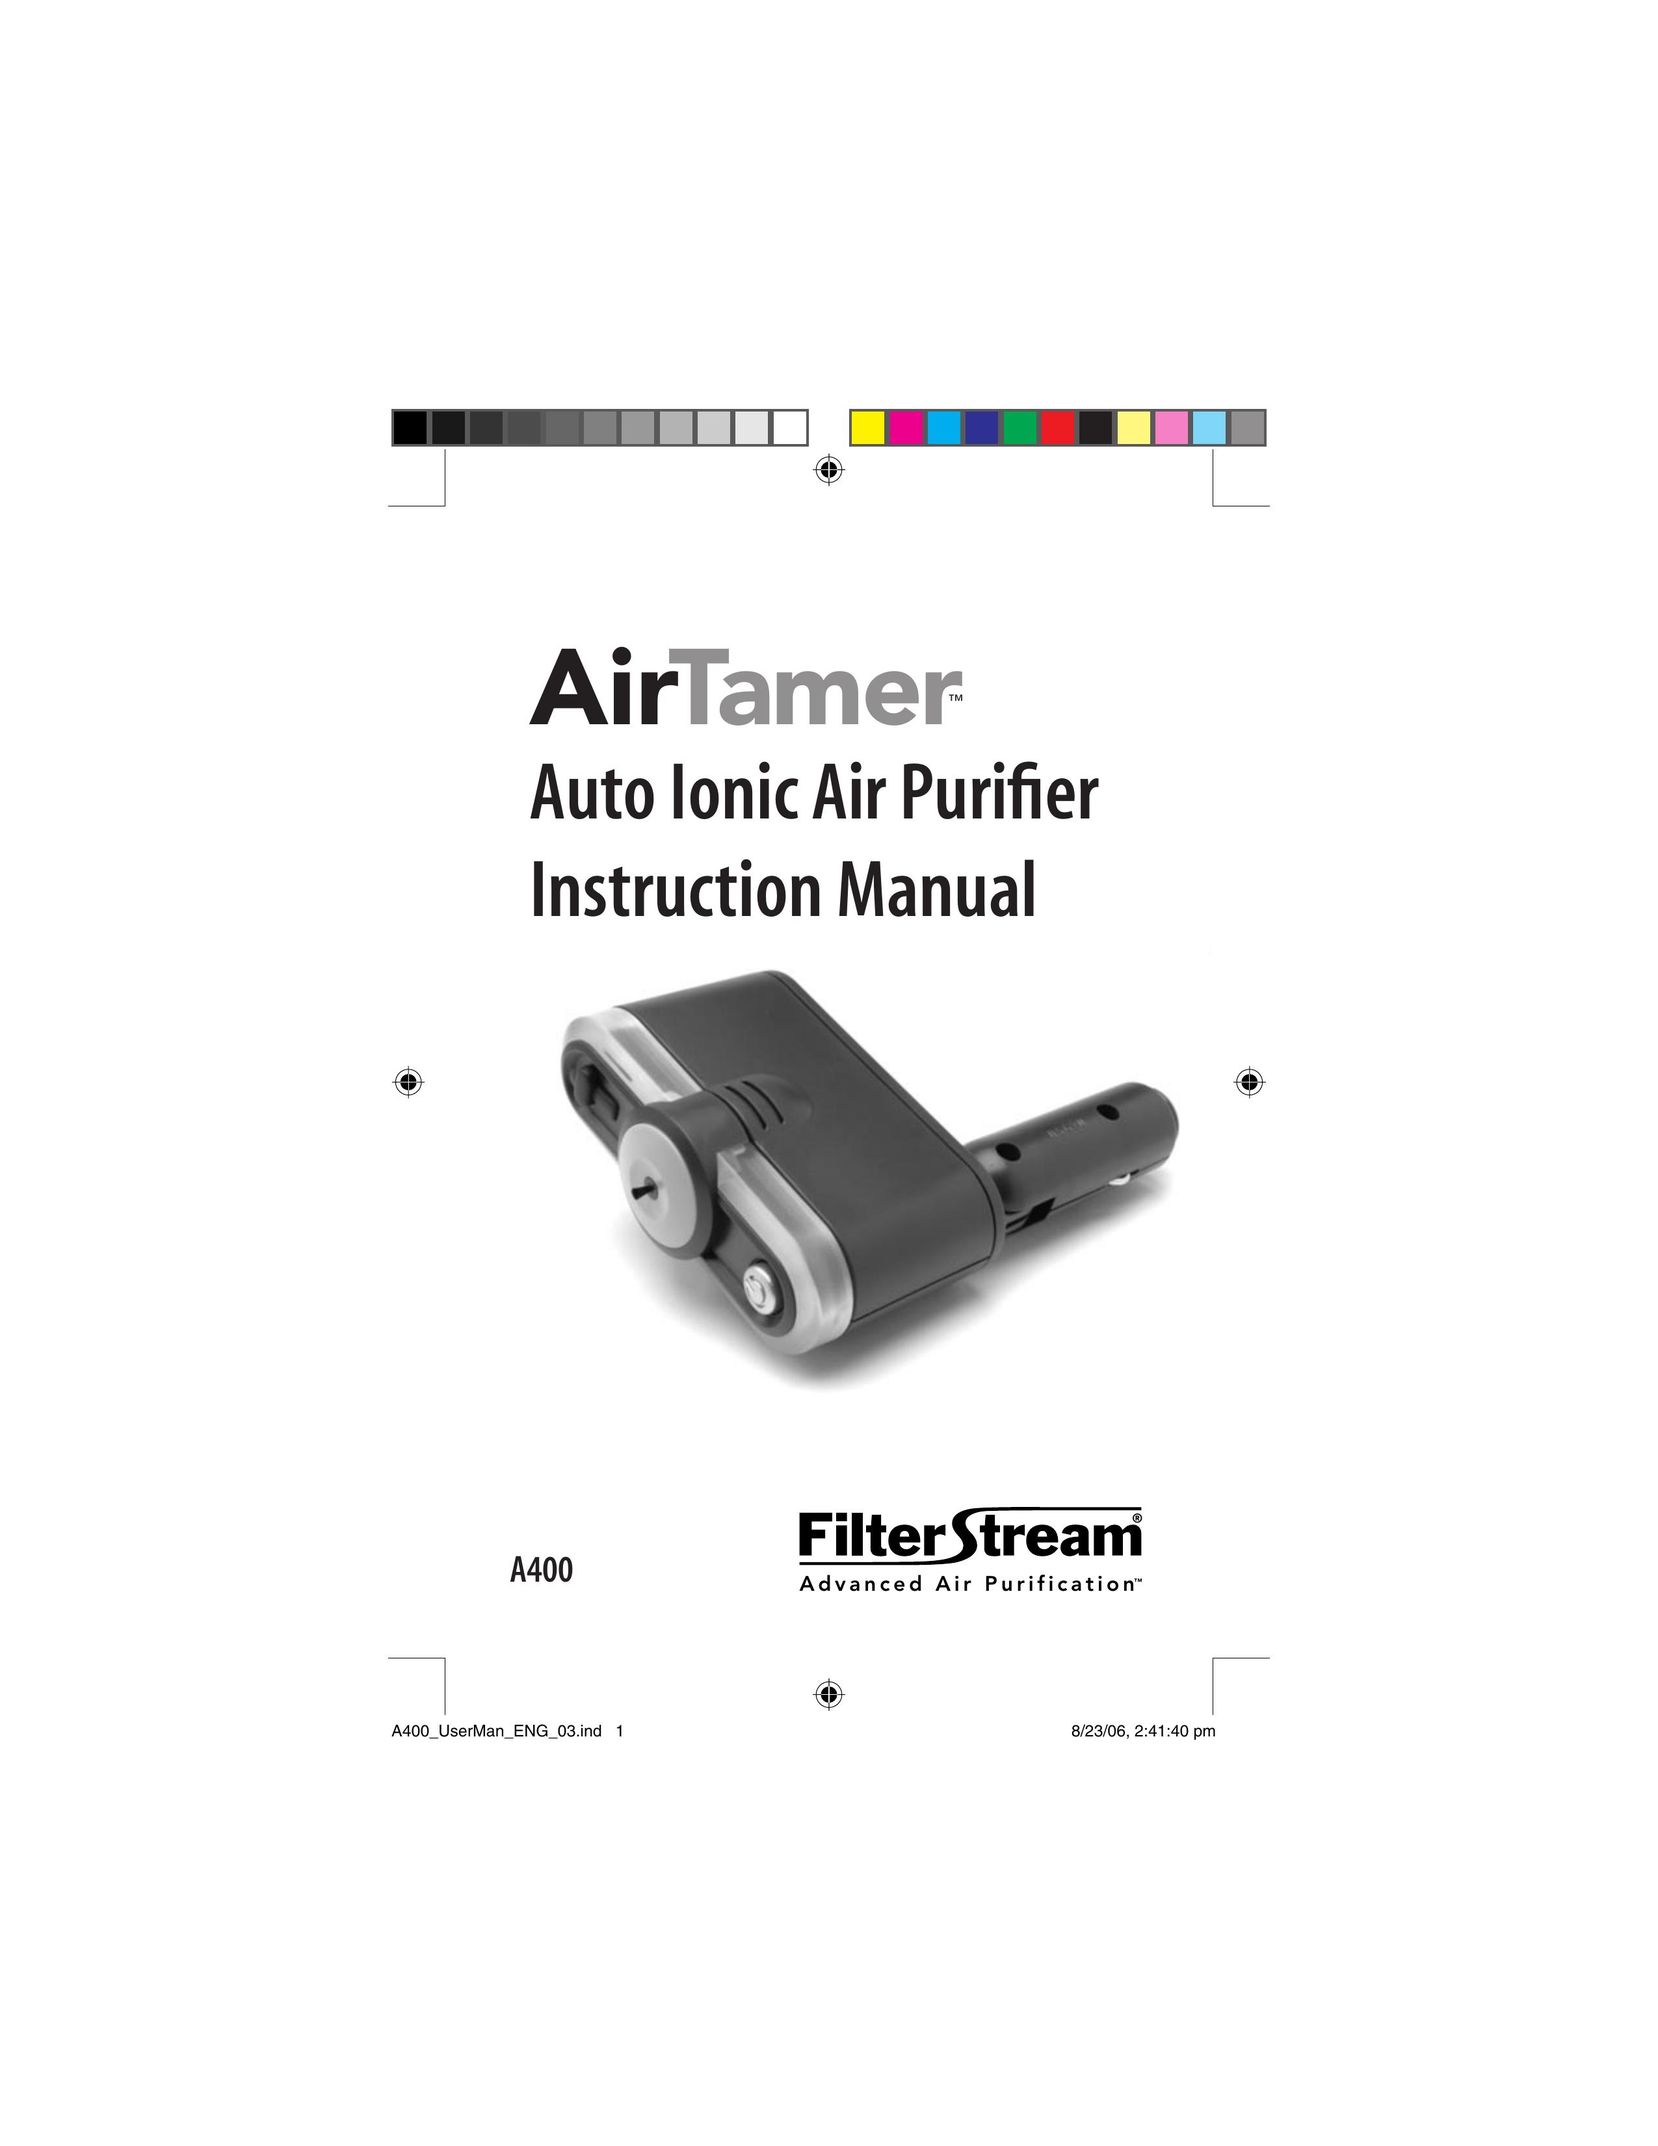 FilterStream A400 Air Cleaner User Manual